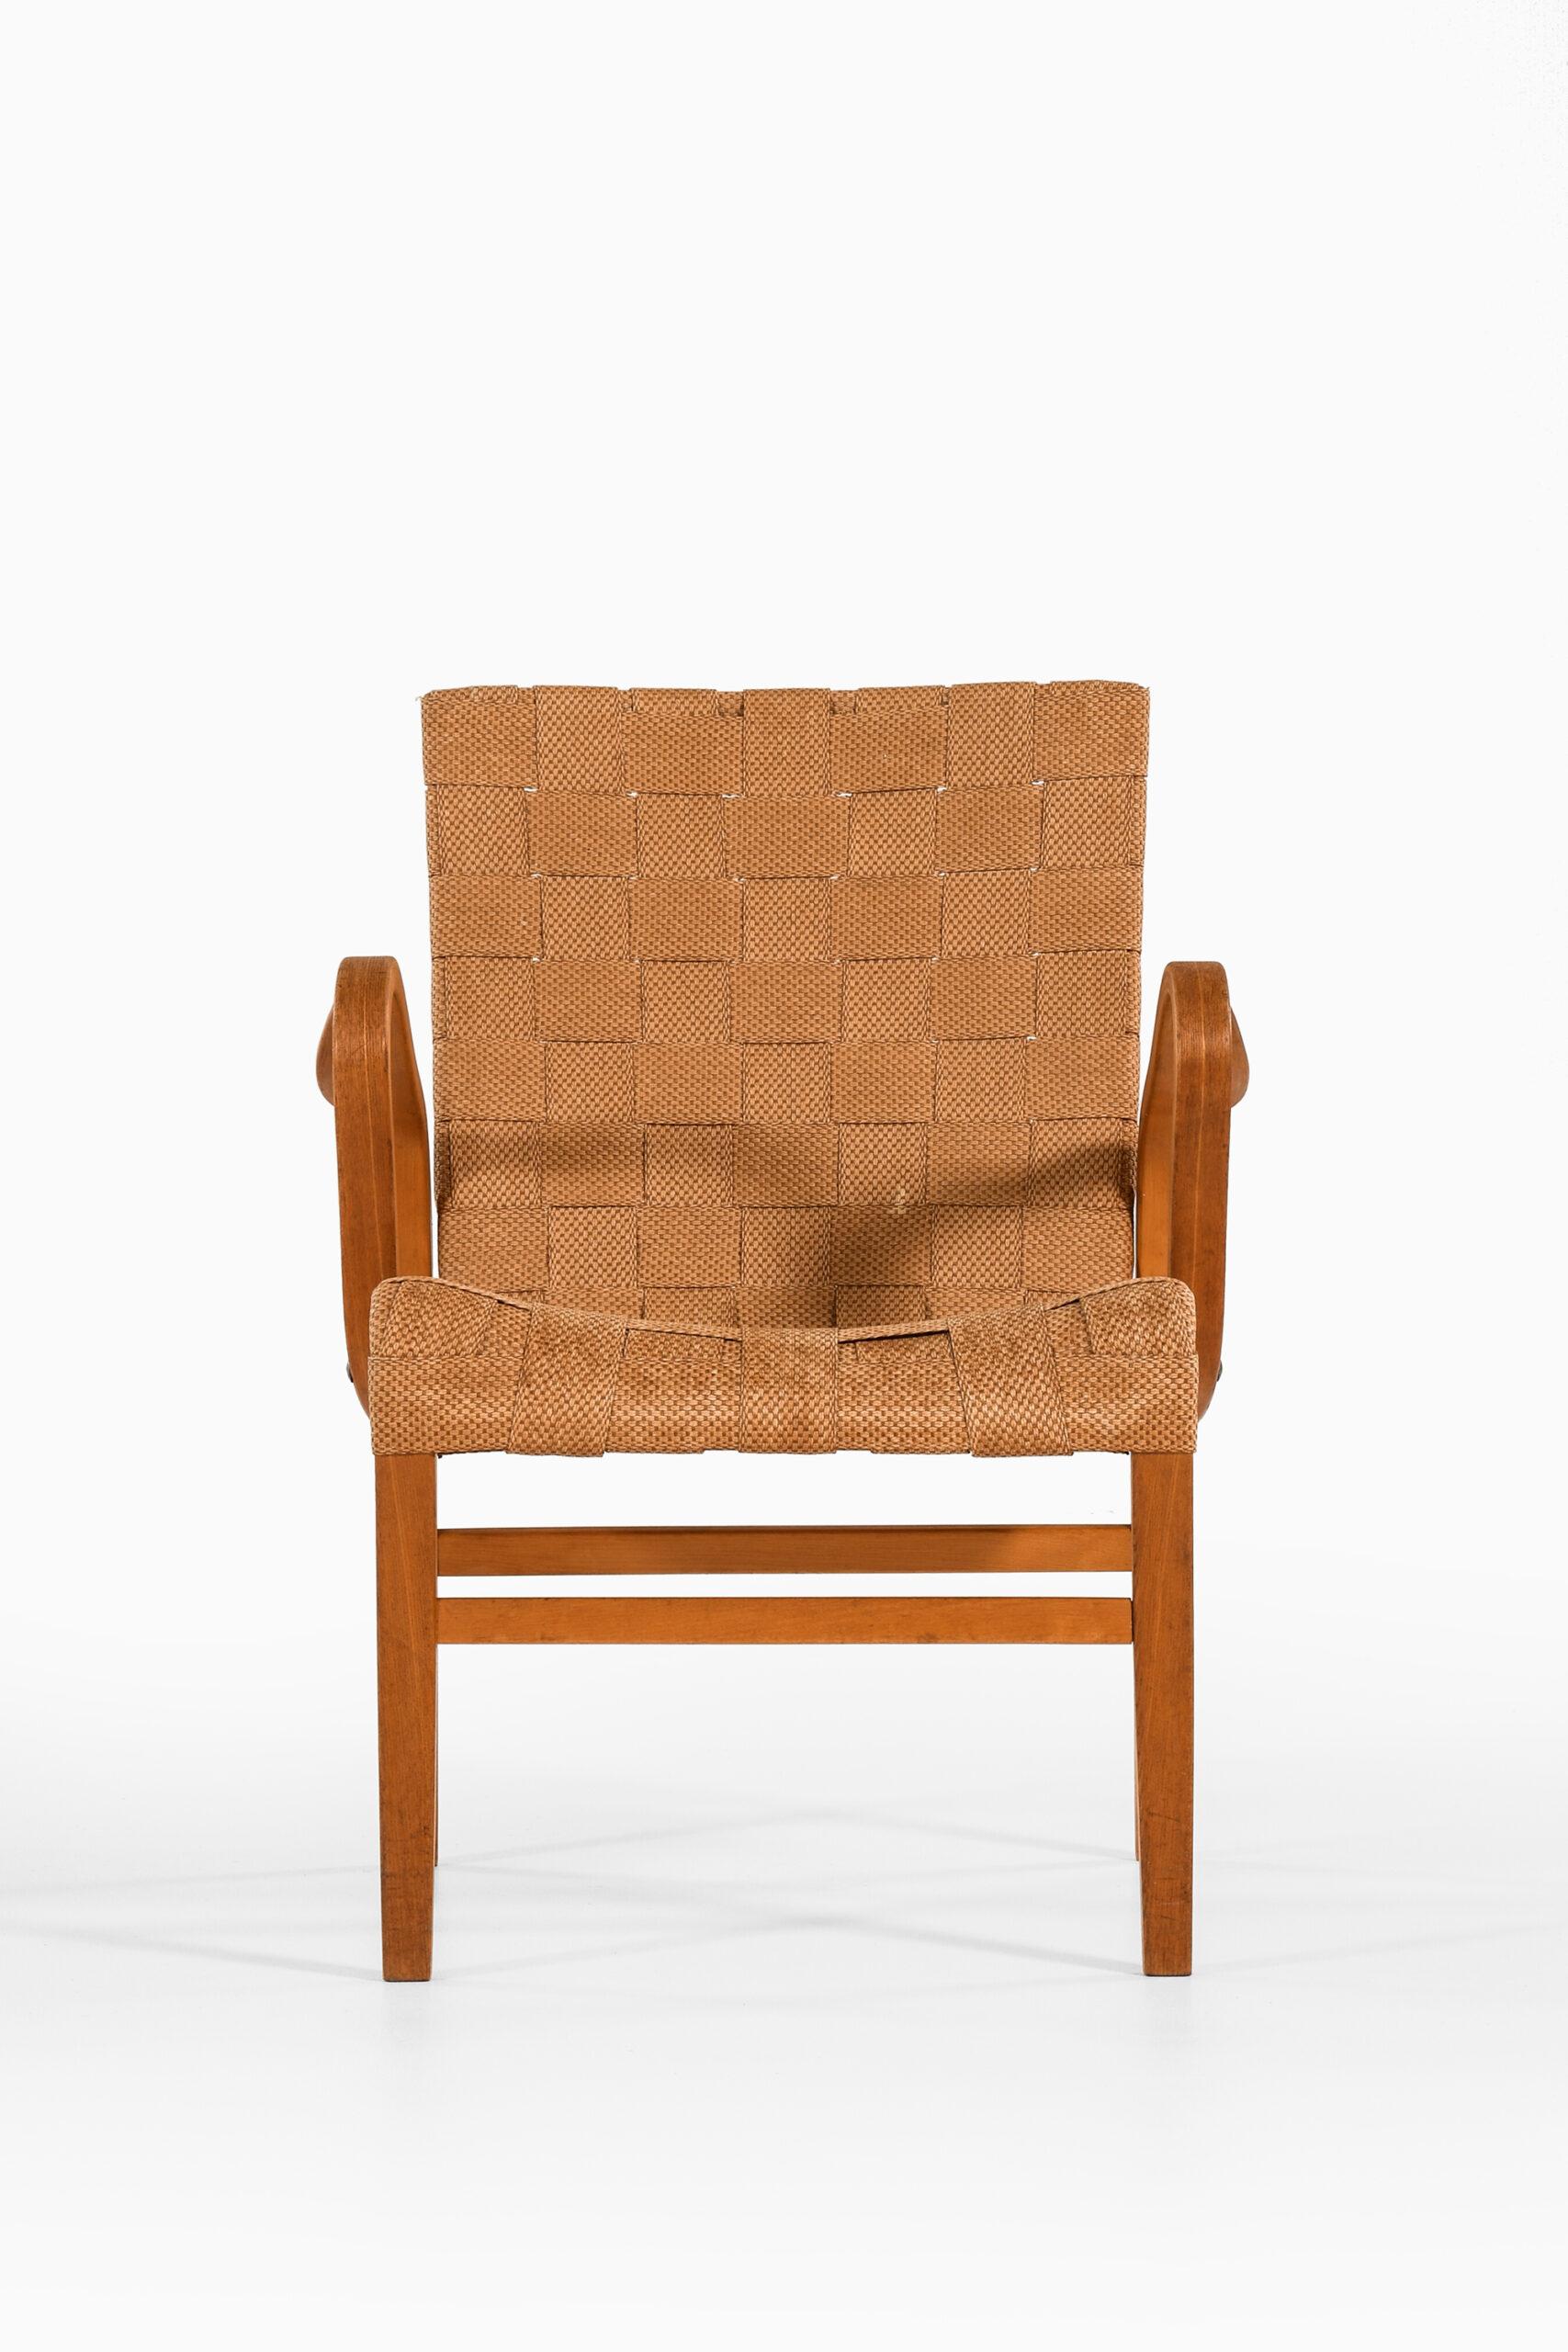 Rare easy chair attributed to Elias Svedberg. Produced by Ferdinand Lundquist in Göteborg, Sweden.